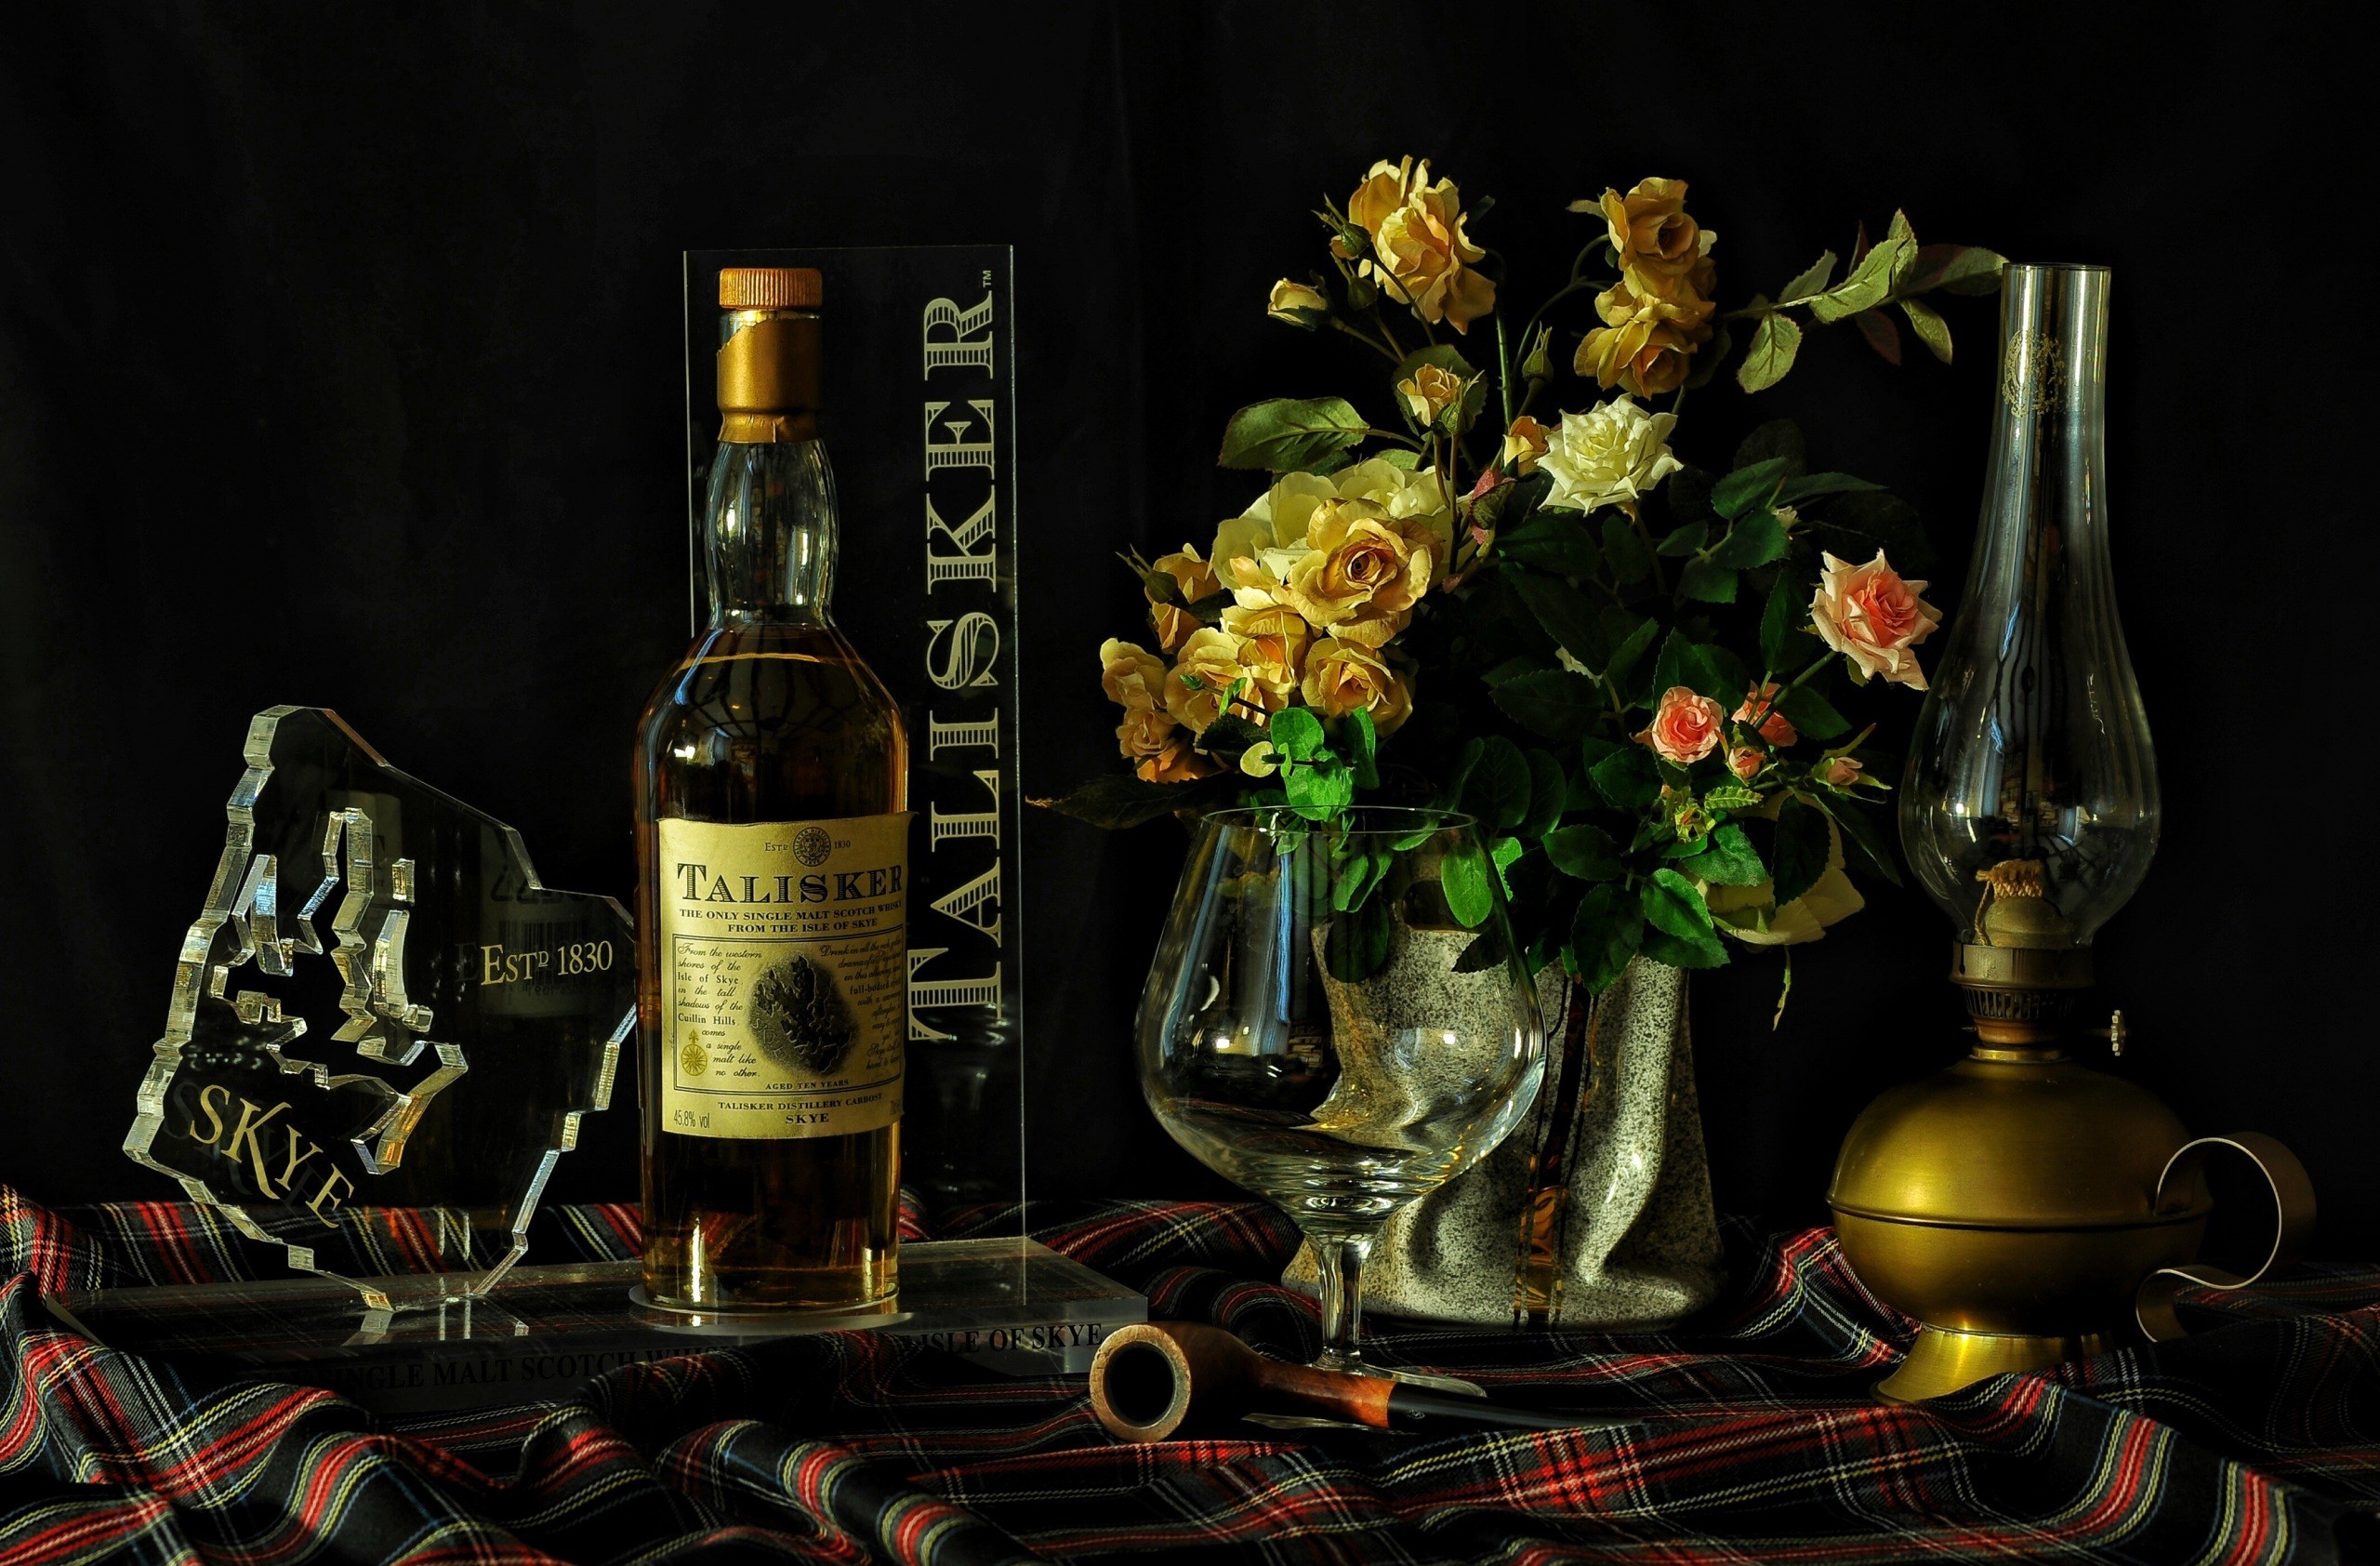 General 2560x1684 alcohol flowers bottles still life Scotch whiskey pipes Talisker lantern indoors dark background food plants vases numbers 1830 (Year)